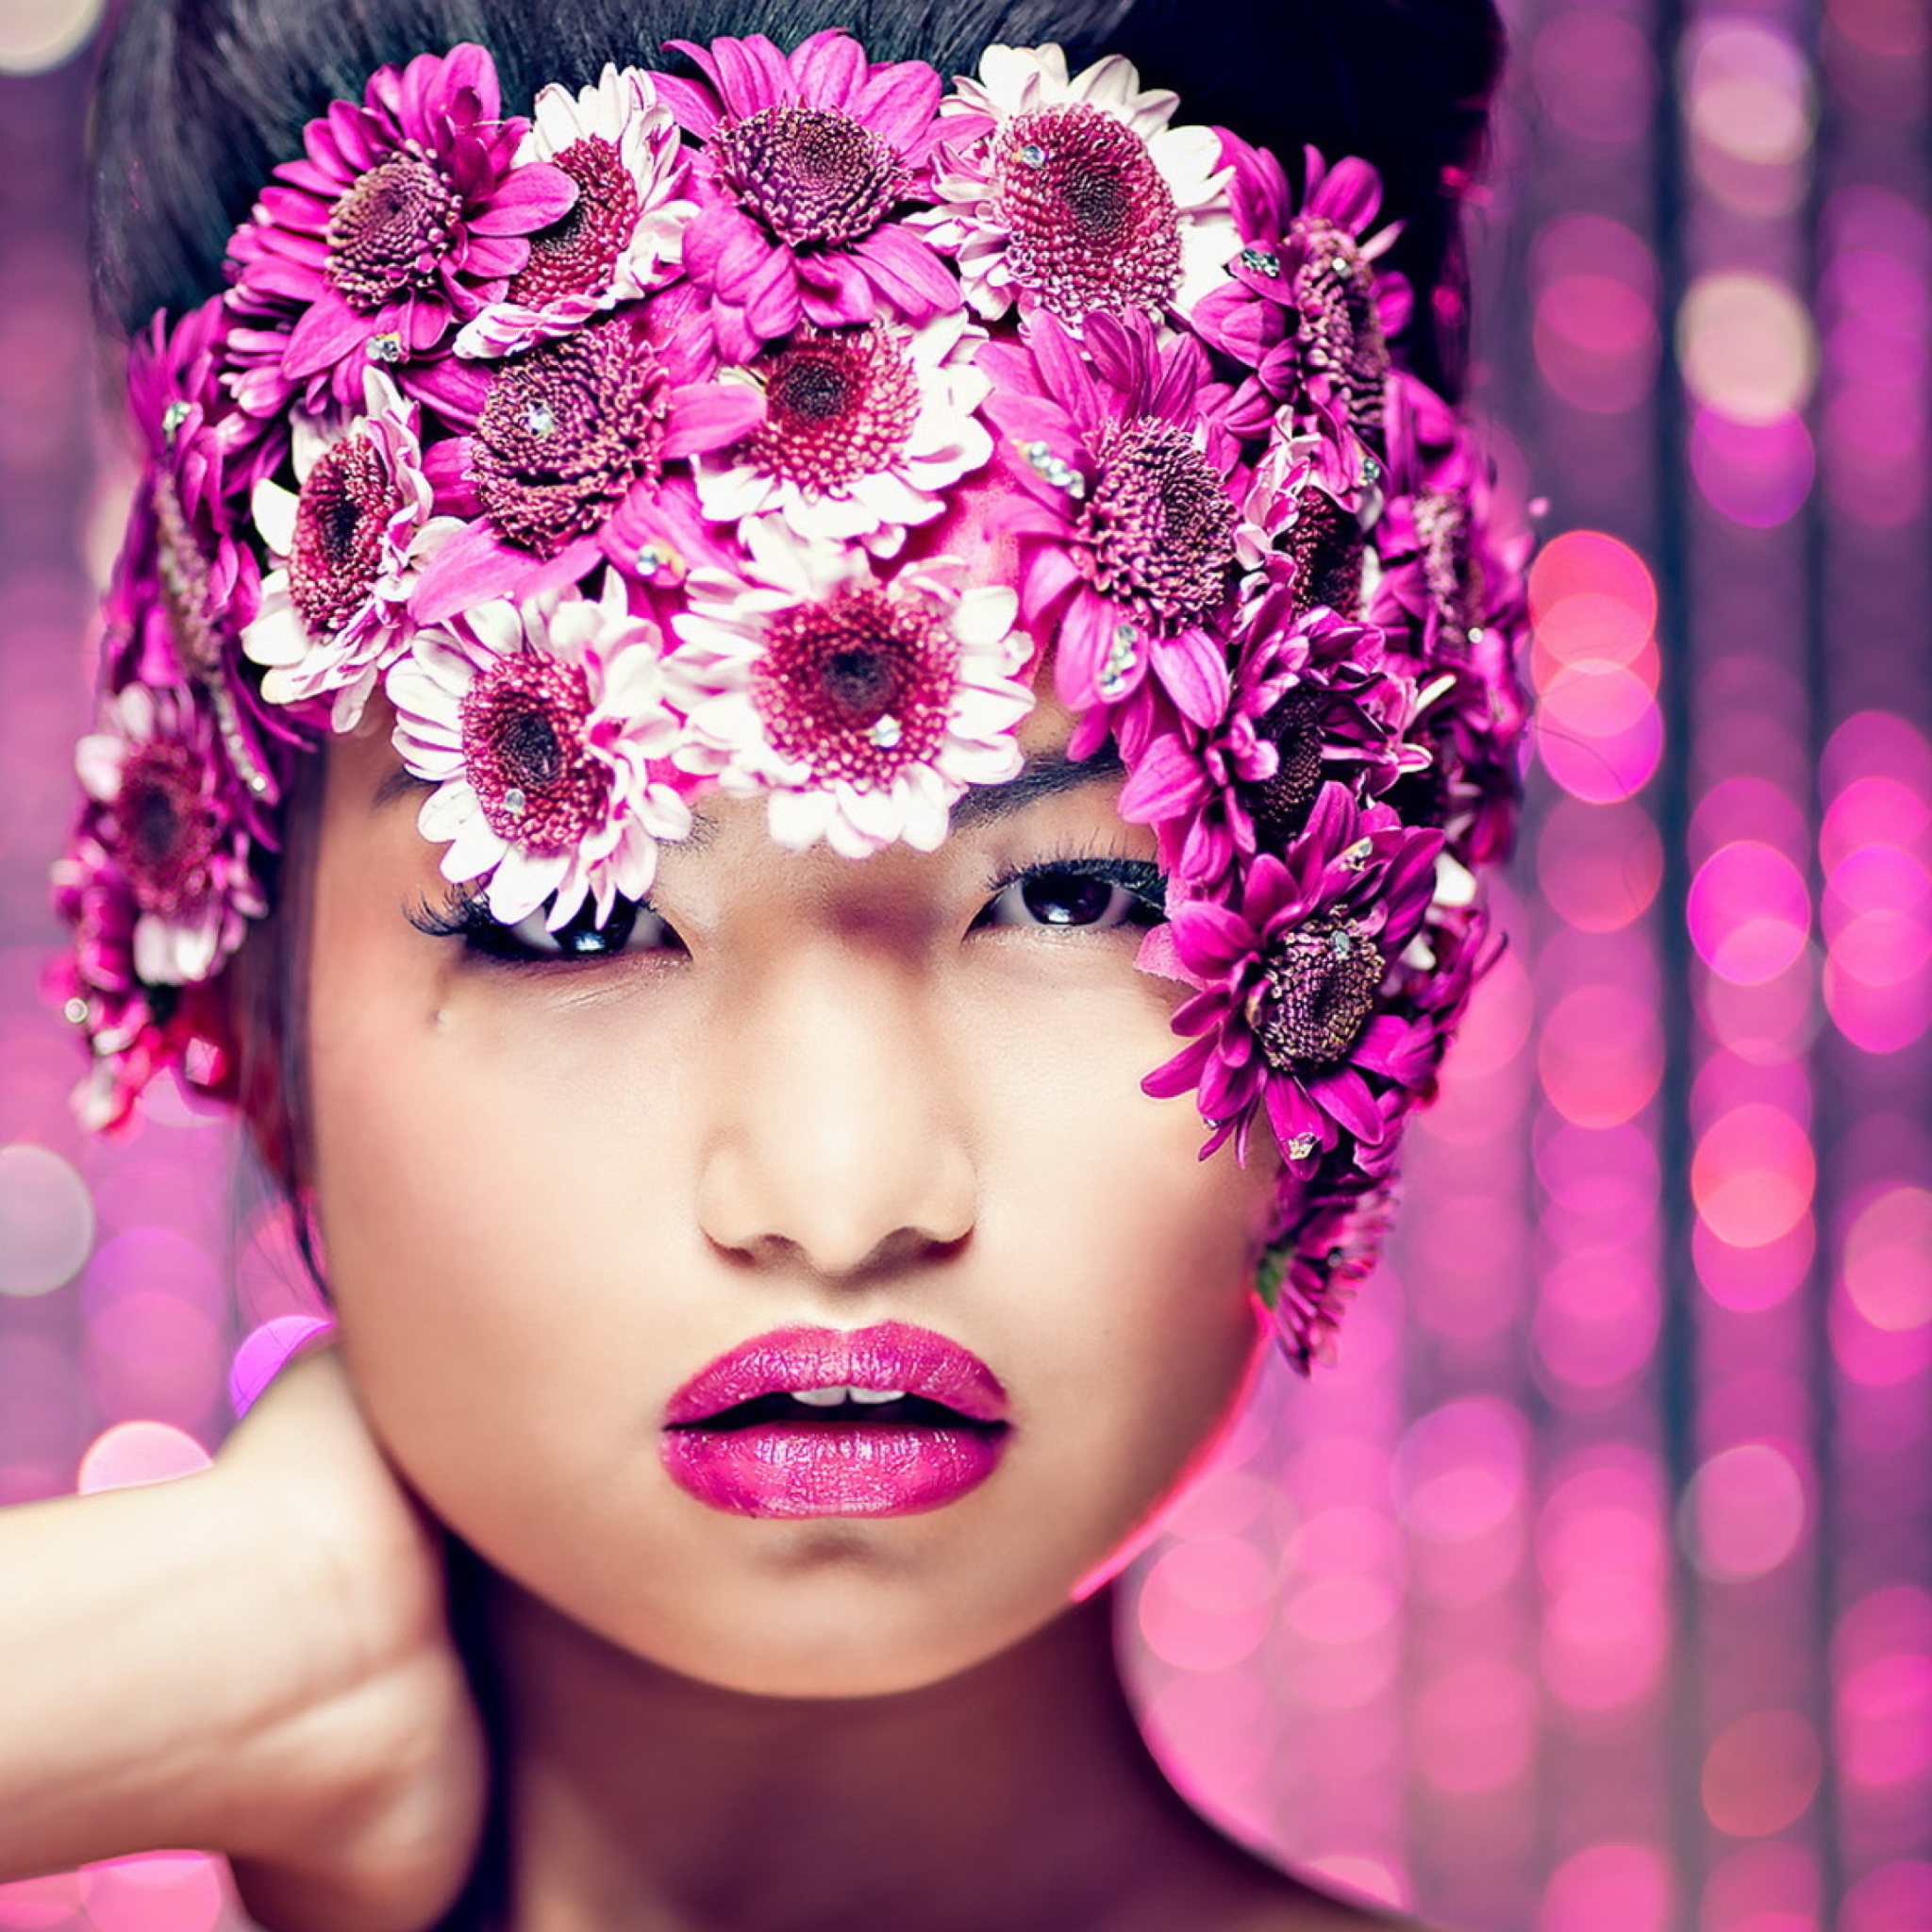 Asian Fashion Model With Pink Flower Wreath wallpaper 2048x2048